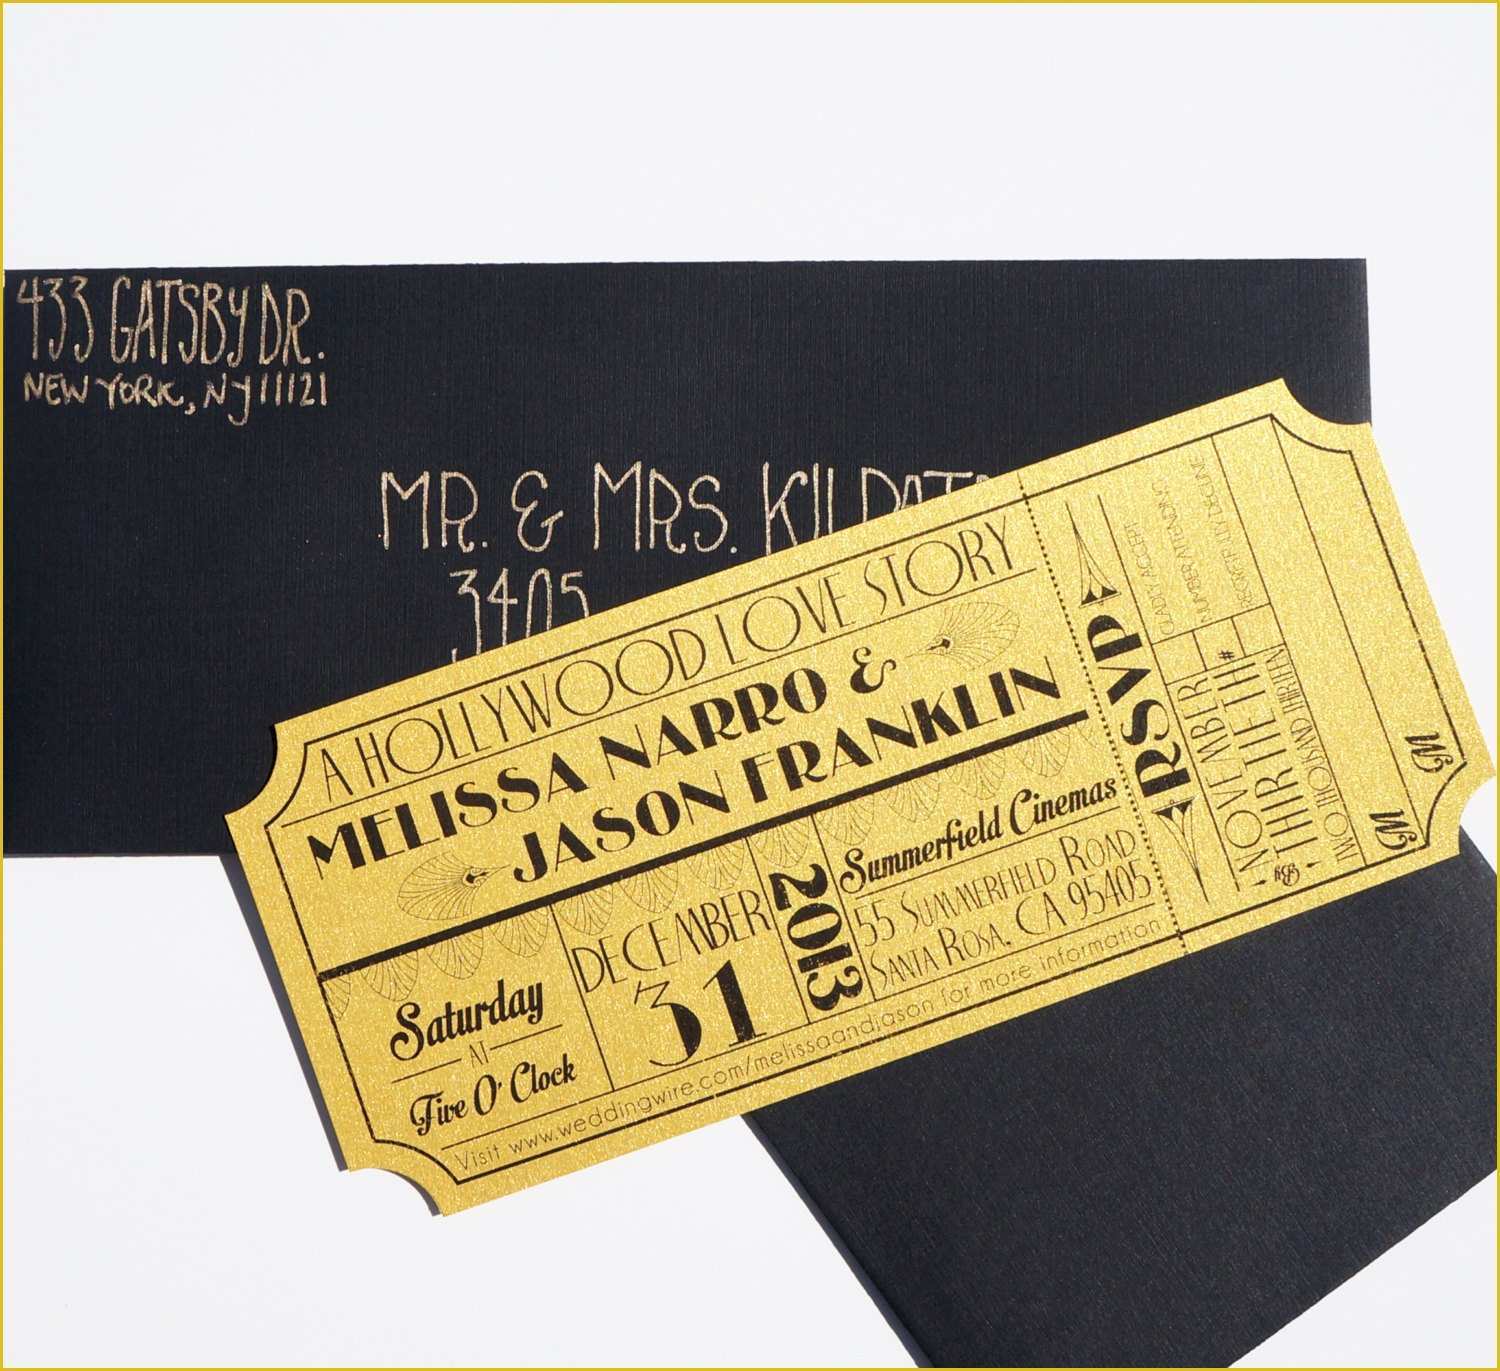 Prom Ticket Template Free Of Prom Ticket Template Bamboodownunder